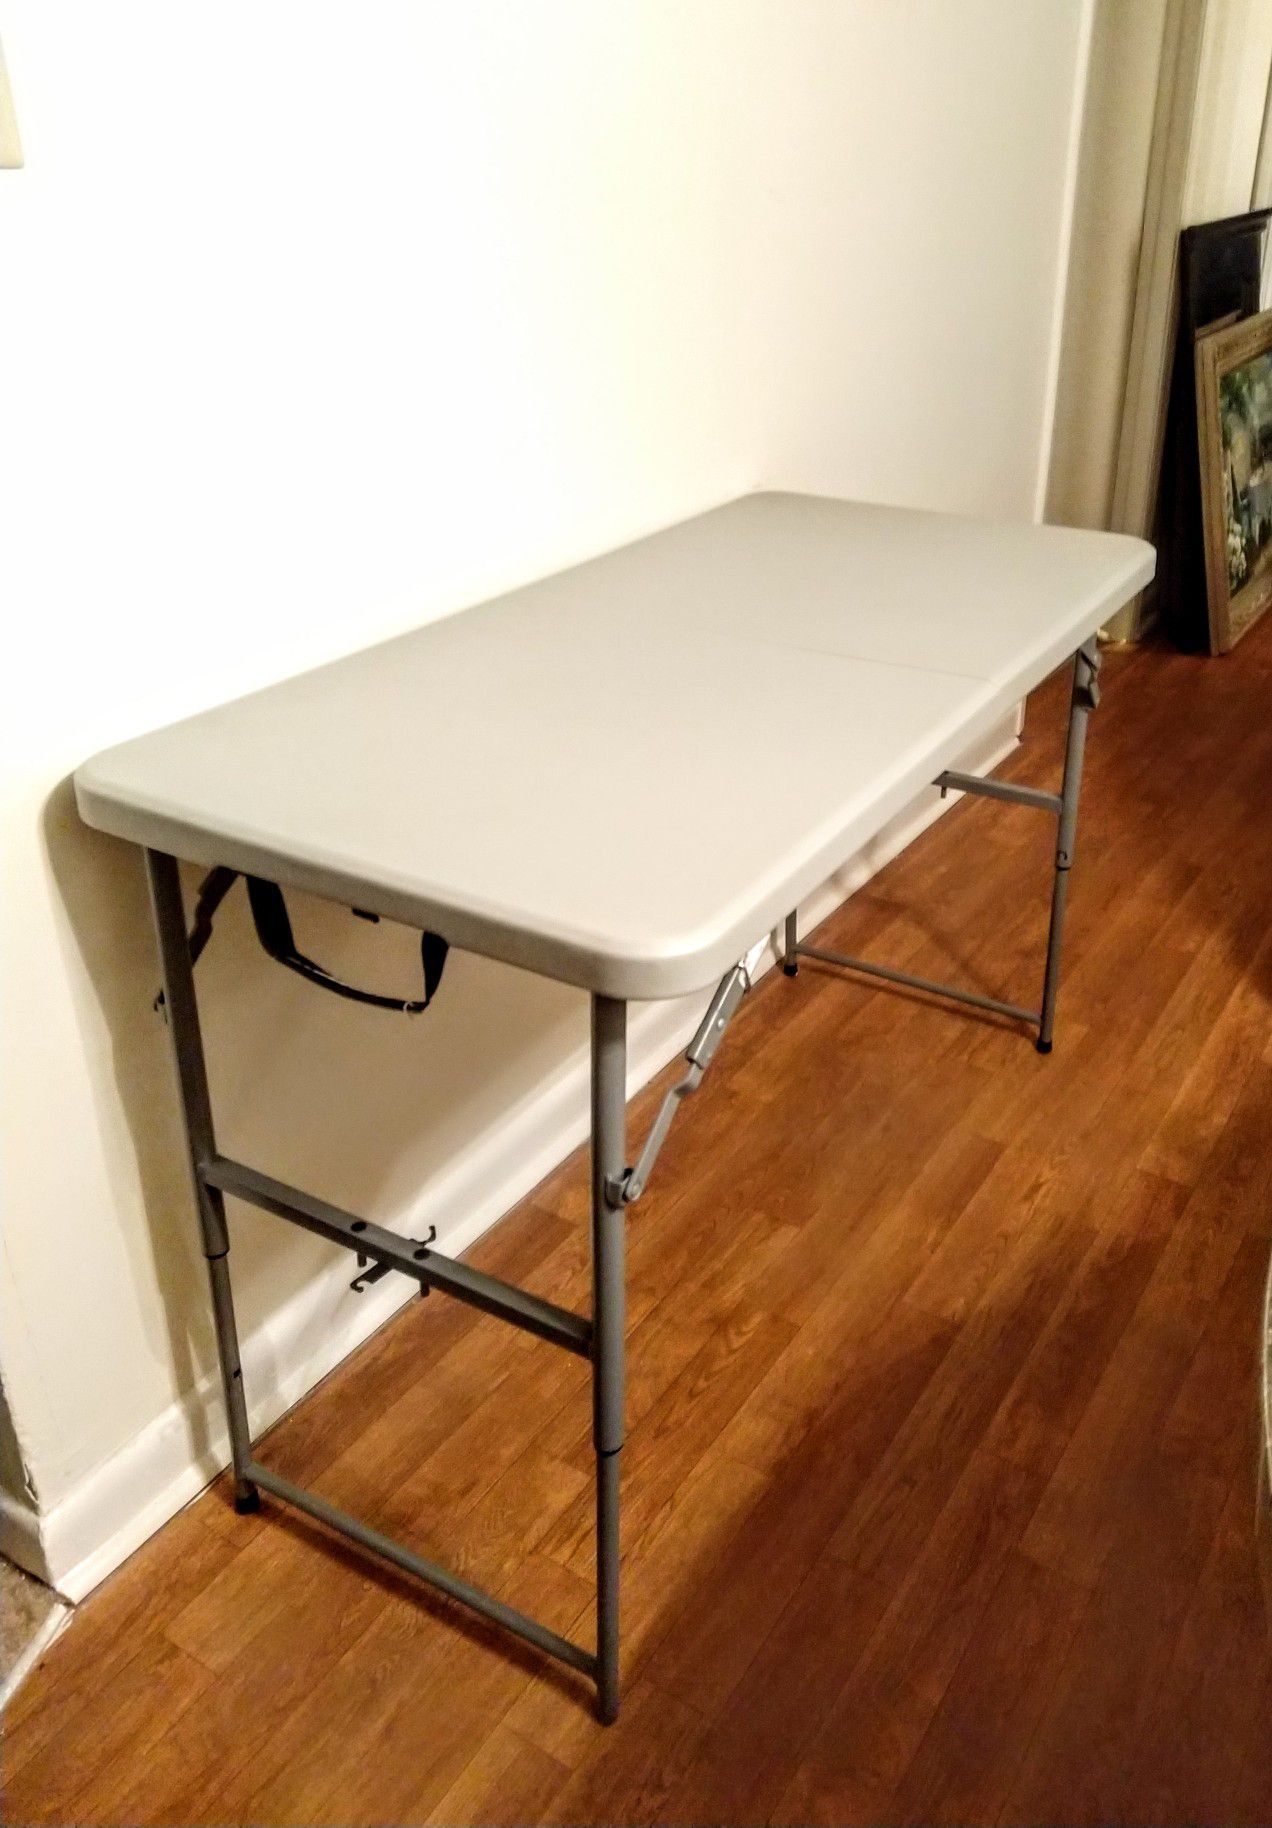 Foldable Table. 4' x 2'